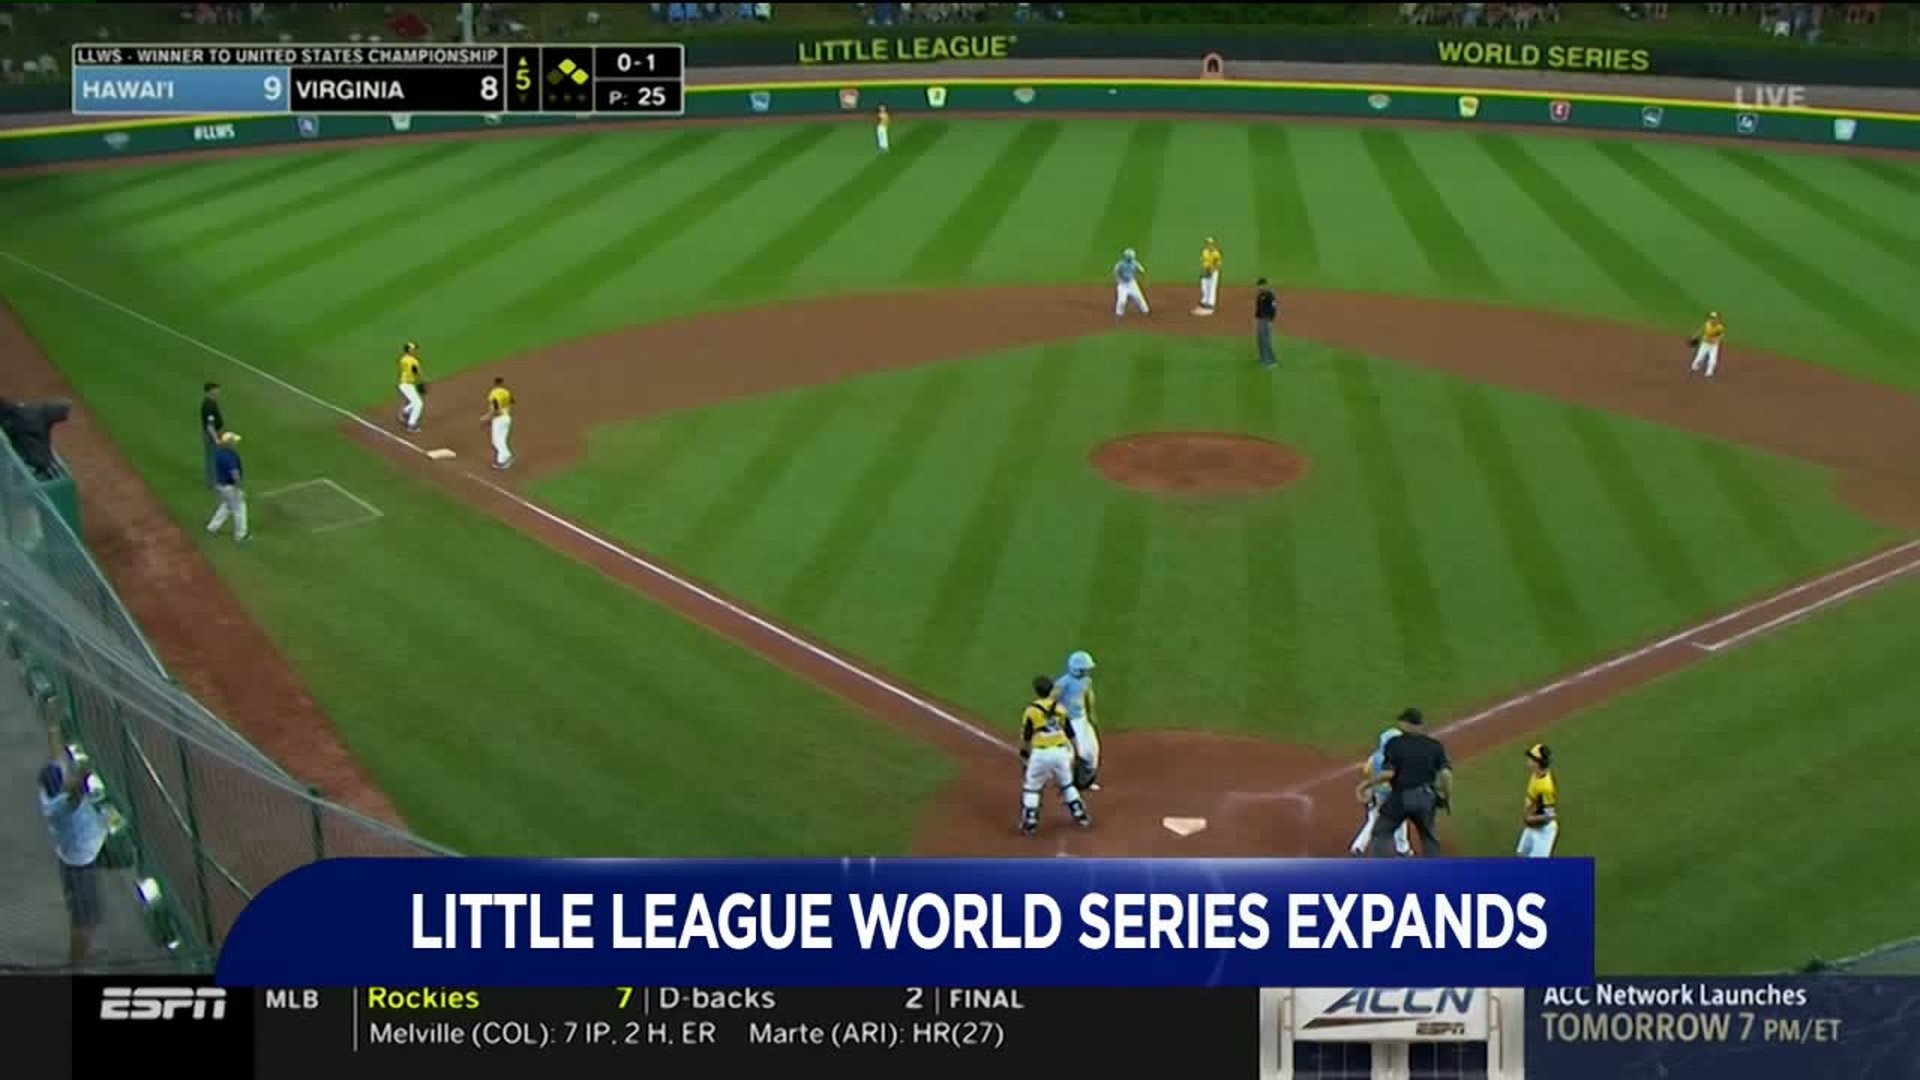 Little League World Series to Expand in 2021